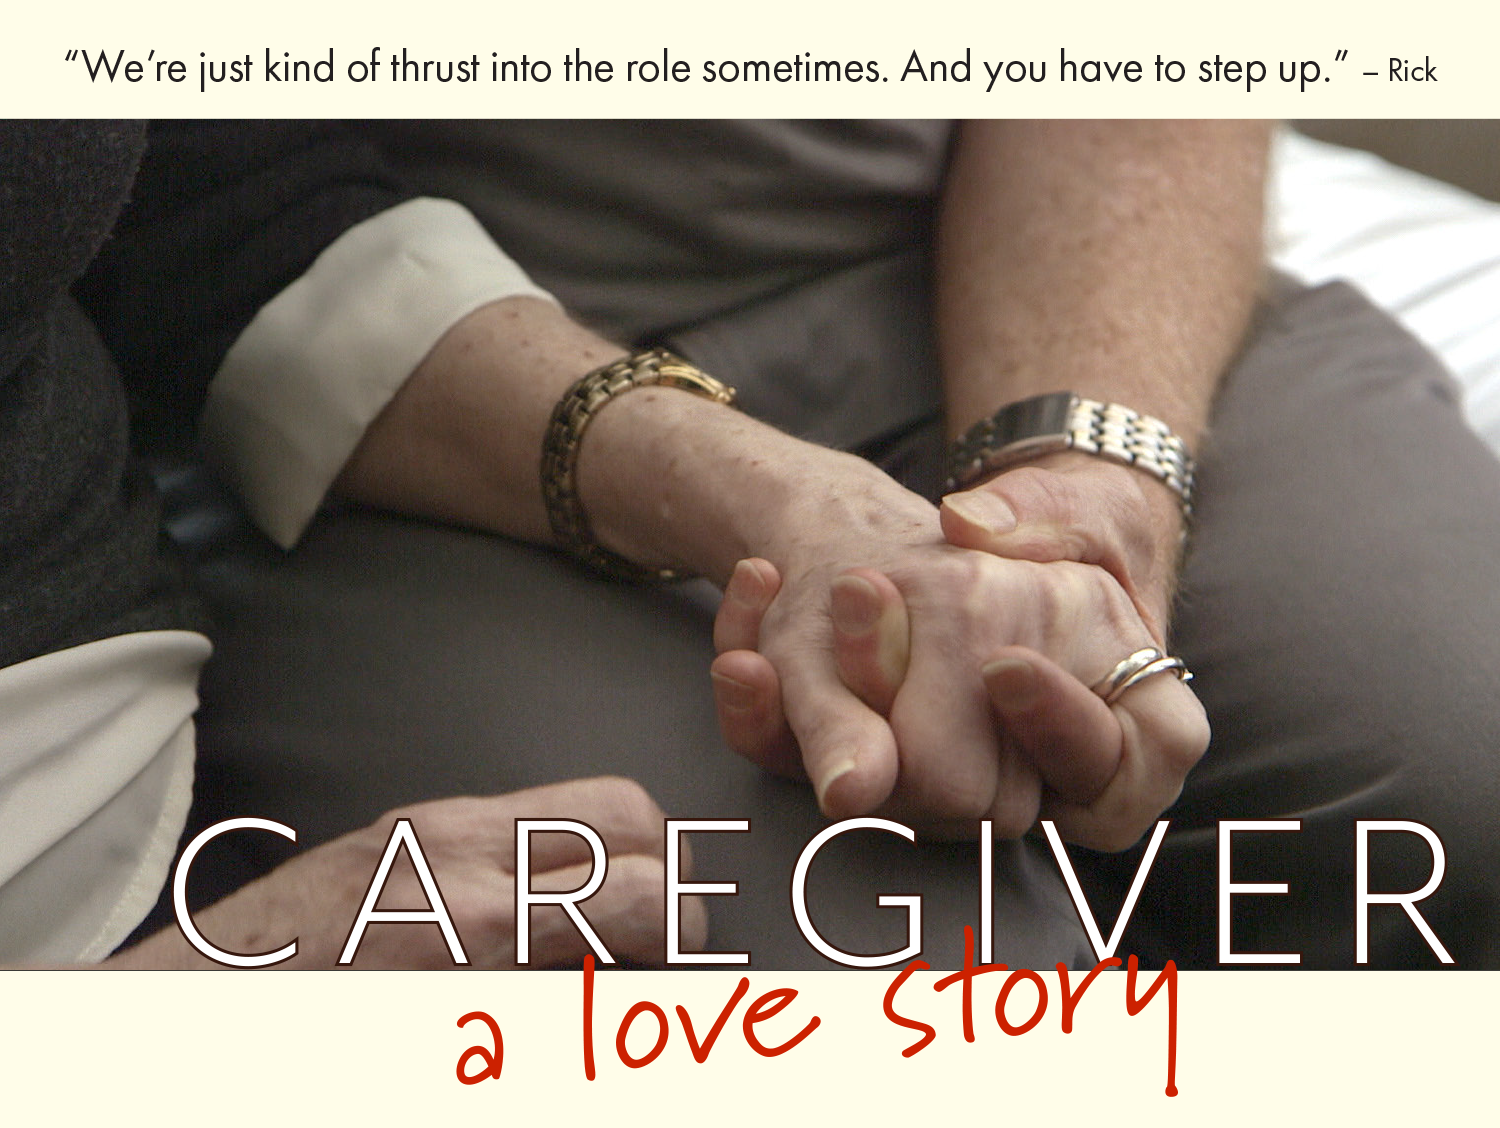 Hospice hosts documentary screening and caregiver discussion